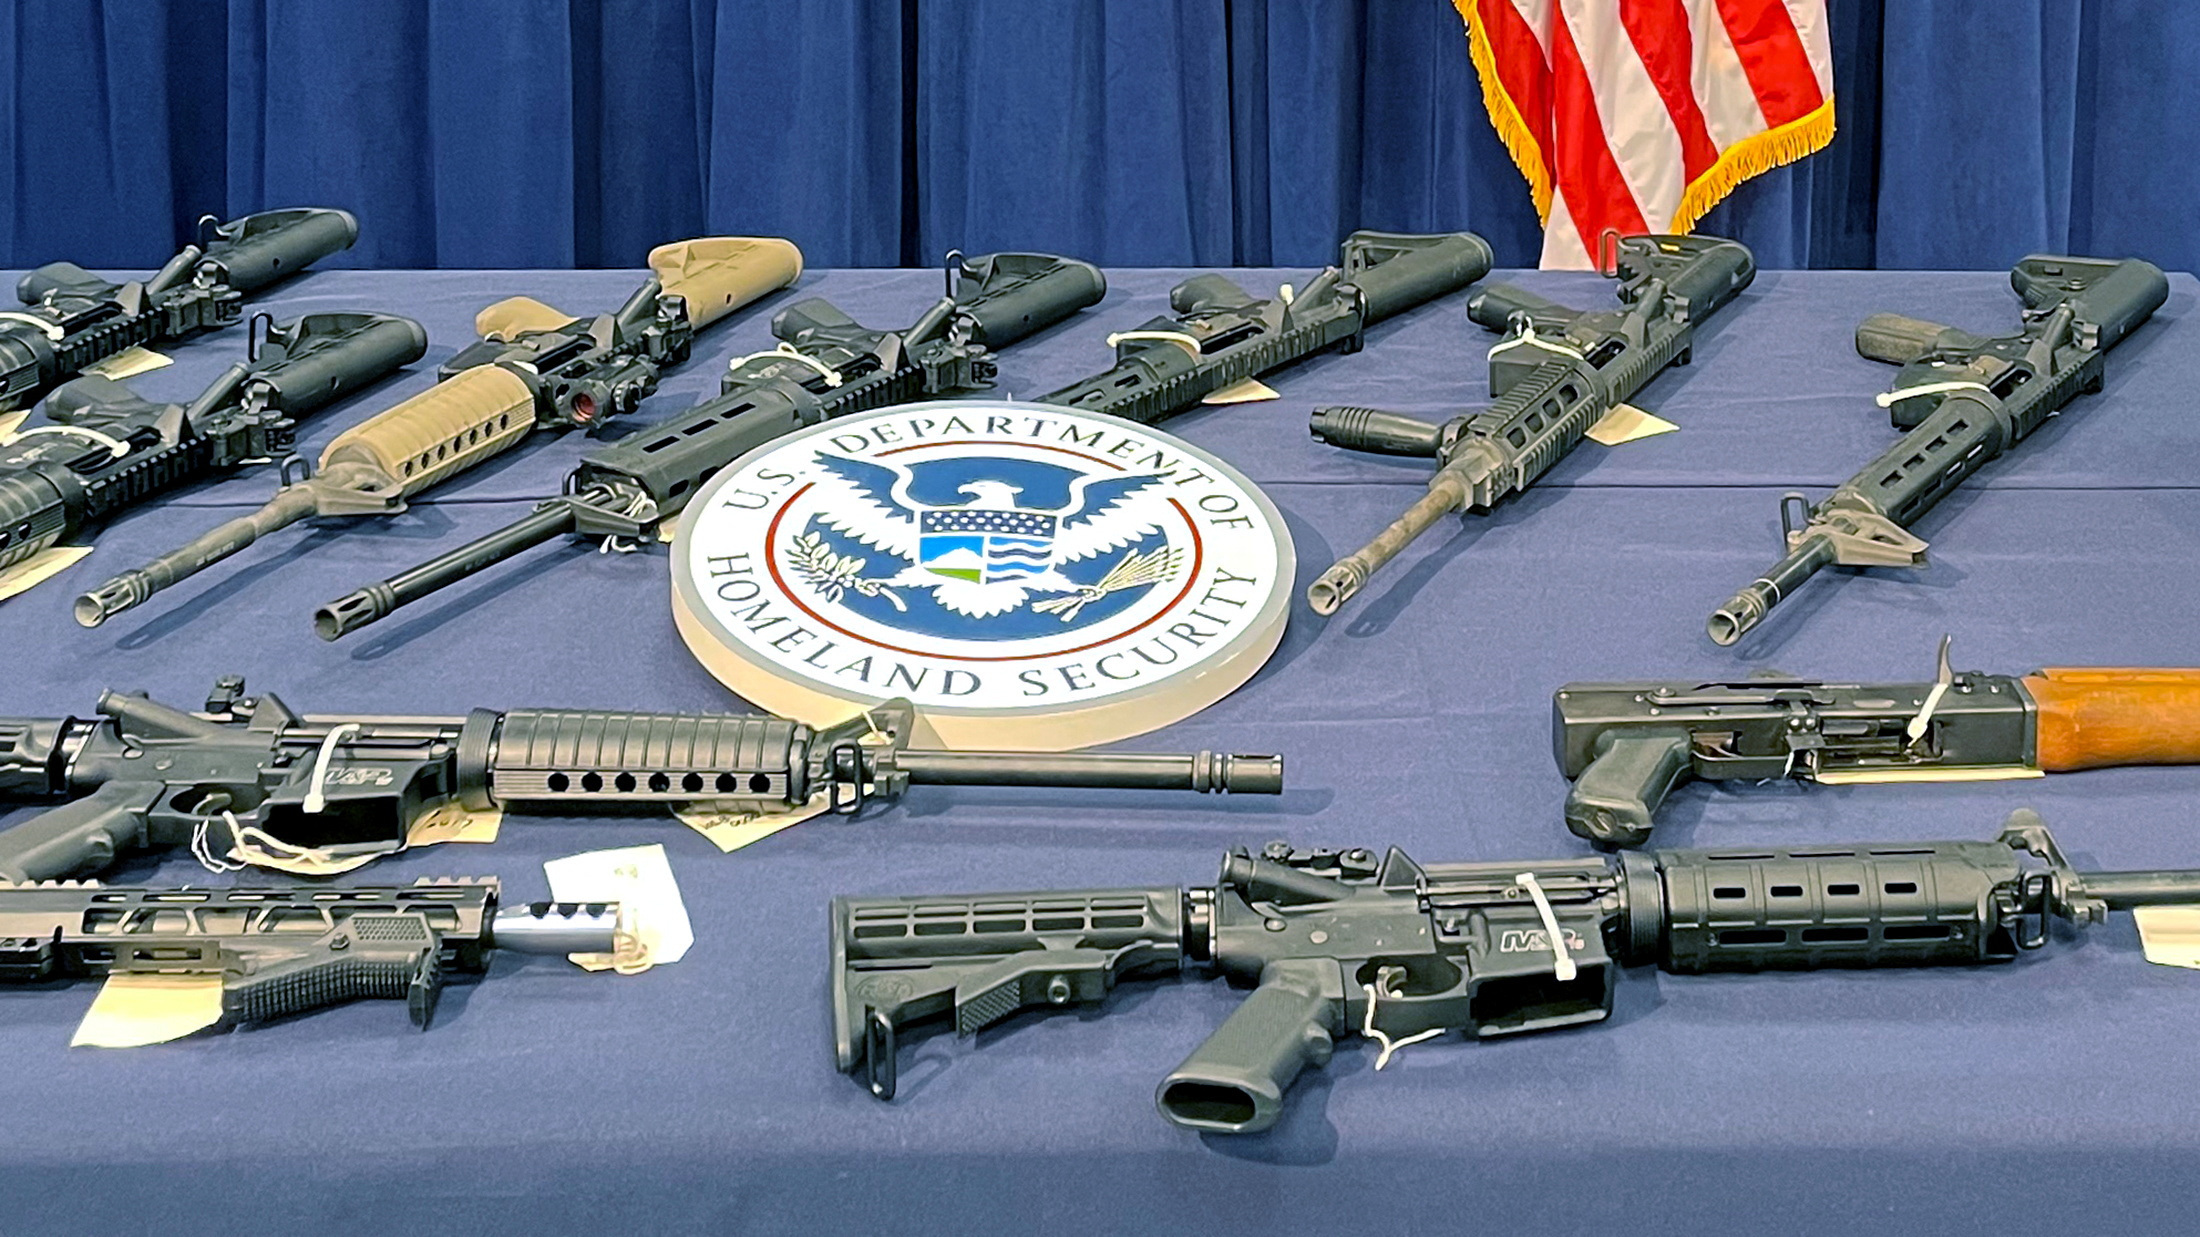 Seized weapons are displayed during a news conference in Miami